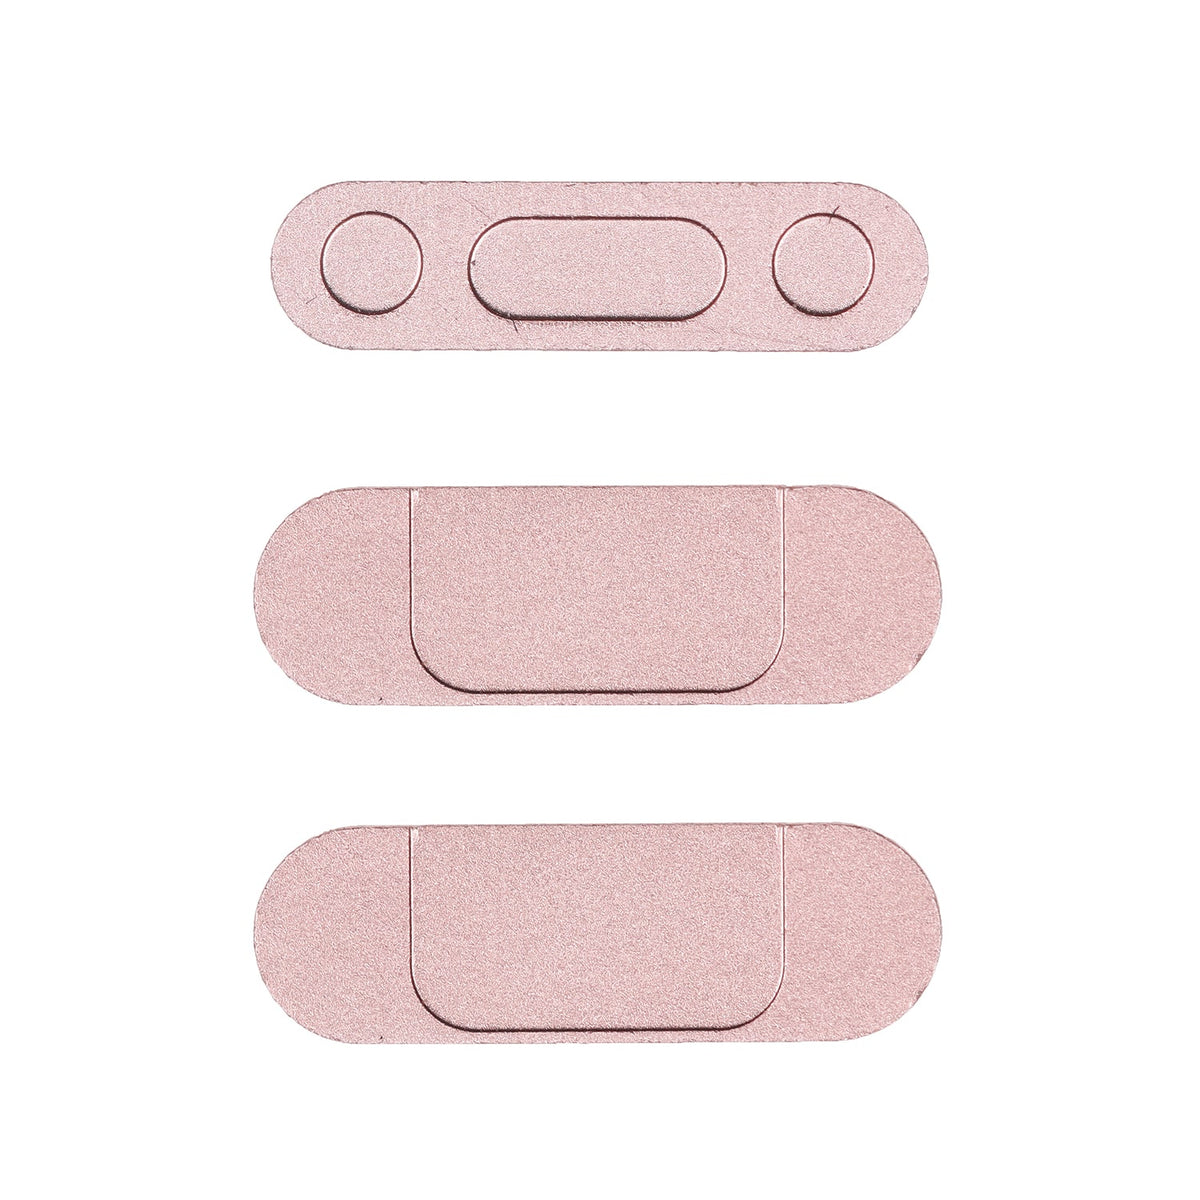 ROSE GOLD SIDE BUTTONS SET FOR IPAD 7TH